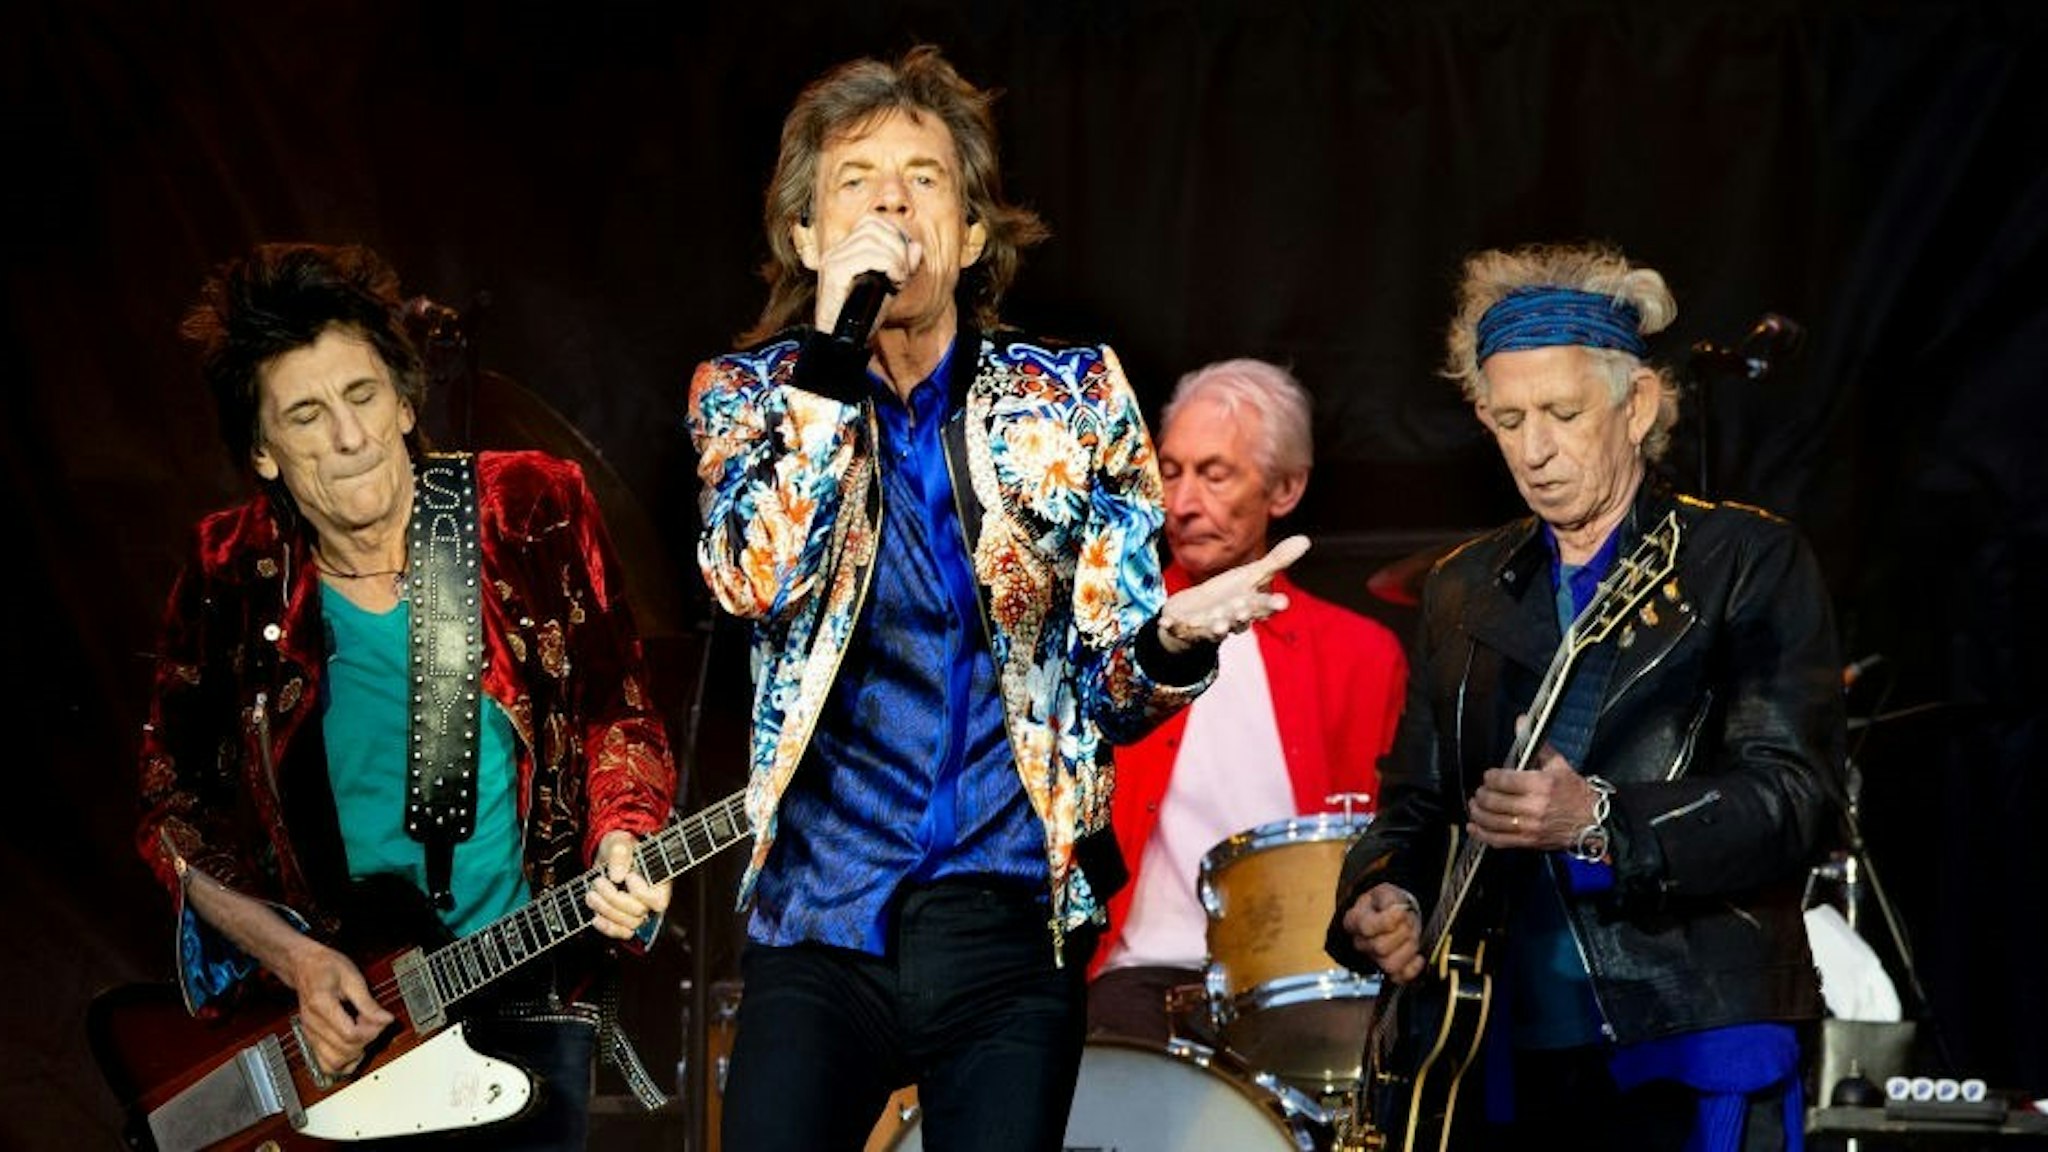 MANCHESTER, ENGLAND - JUNE 05: Mick Jagger, Keith Richards, Charlie Watts and Ronnie Wood of The Rolling Stones perform live on stage at Old Trafford on June 5, 2018 in Manchester, England. (Photo by